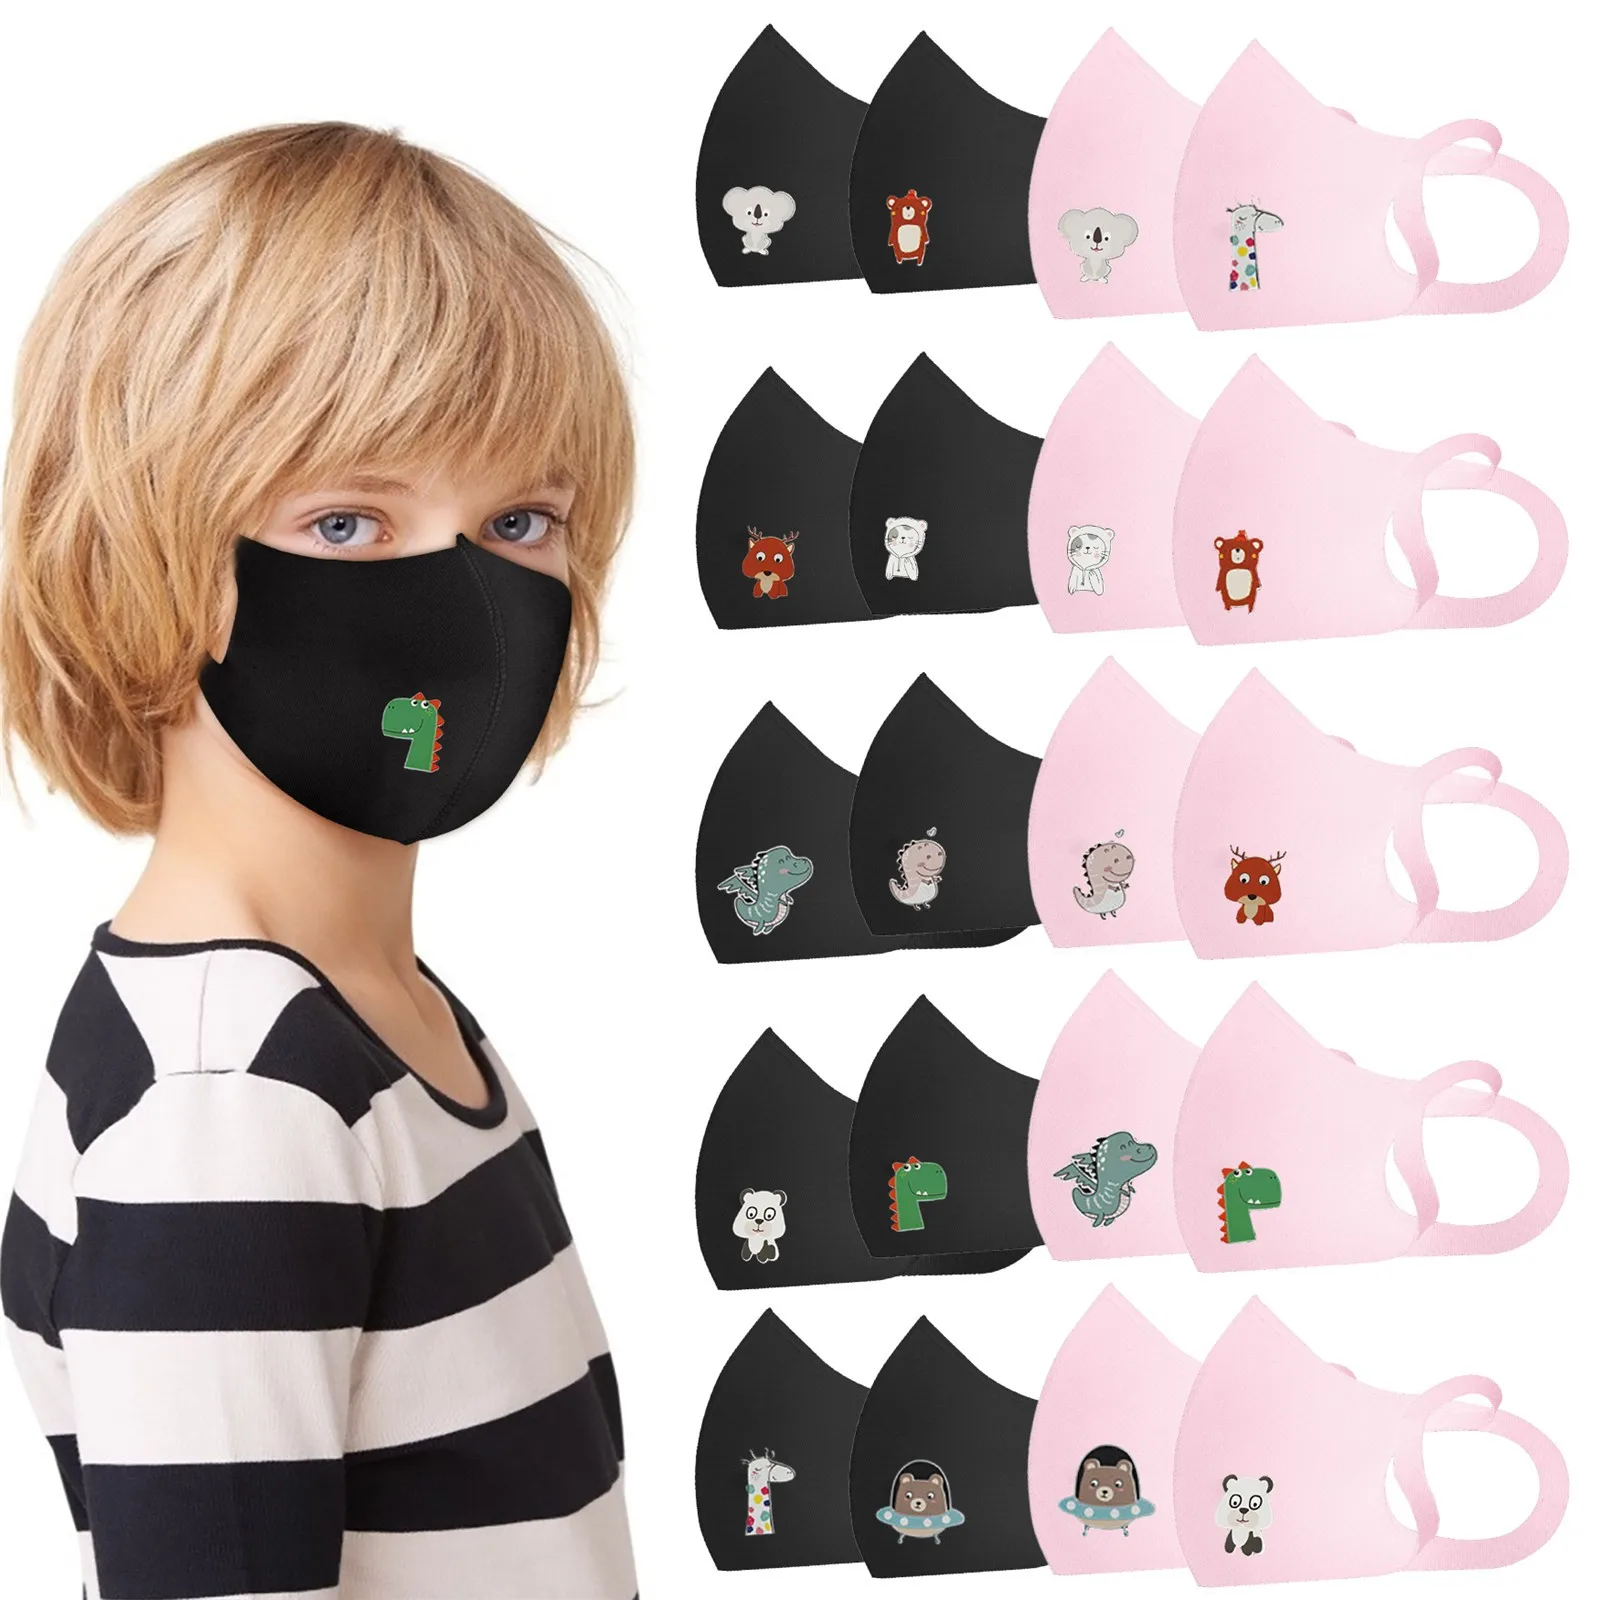 

10pc Kawaii Face Mask For Kids Child Washable Reusable Cloth Mask Elastic Fabric Masks For Girls Baby Earloop Bandage Masques